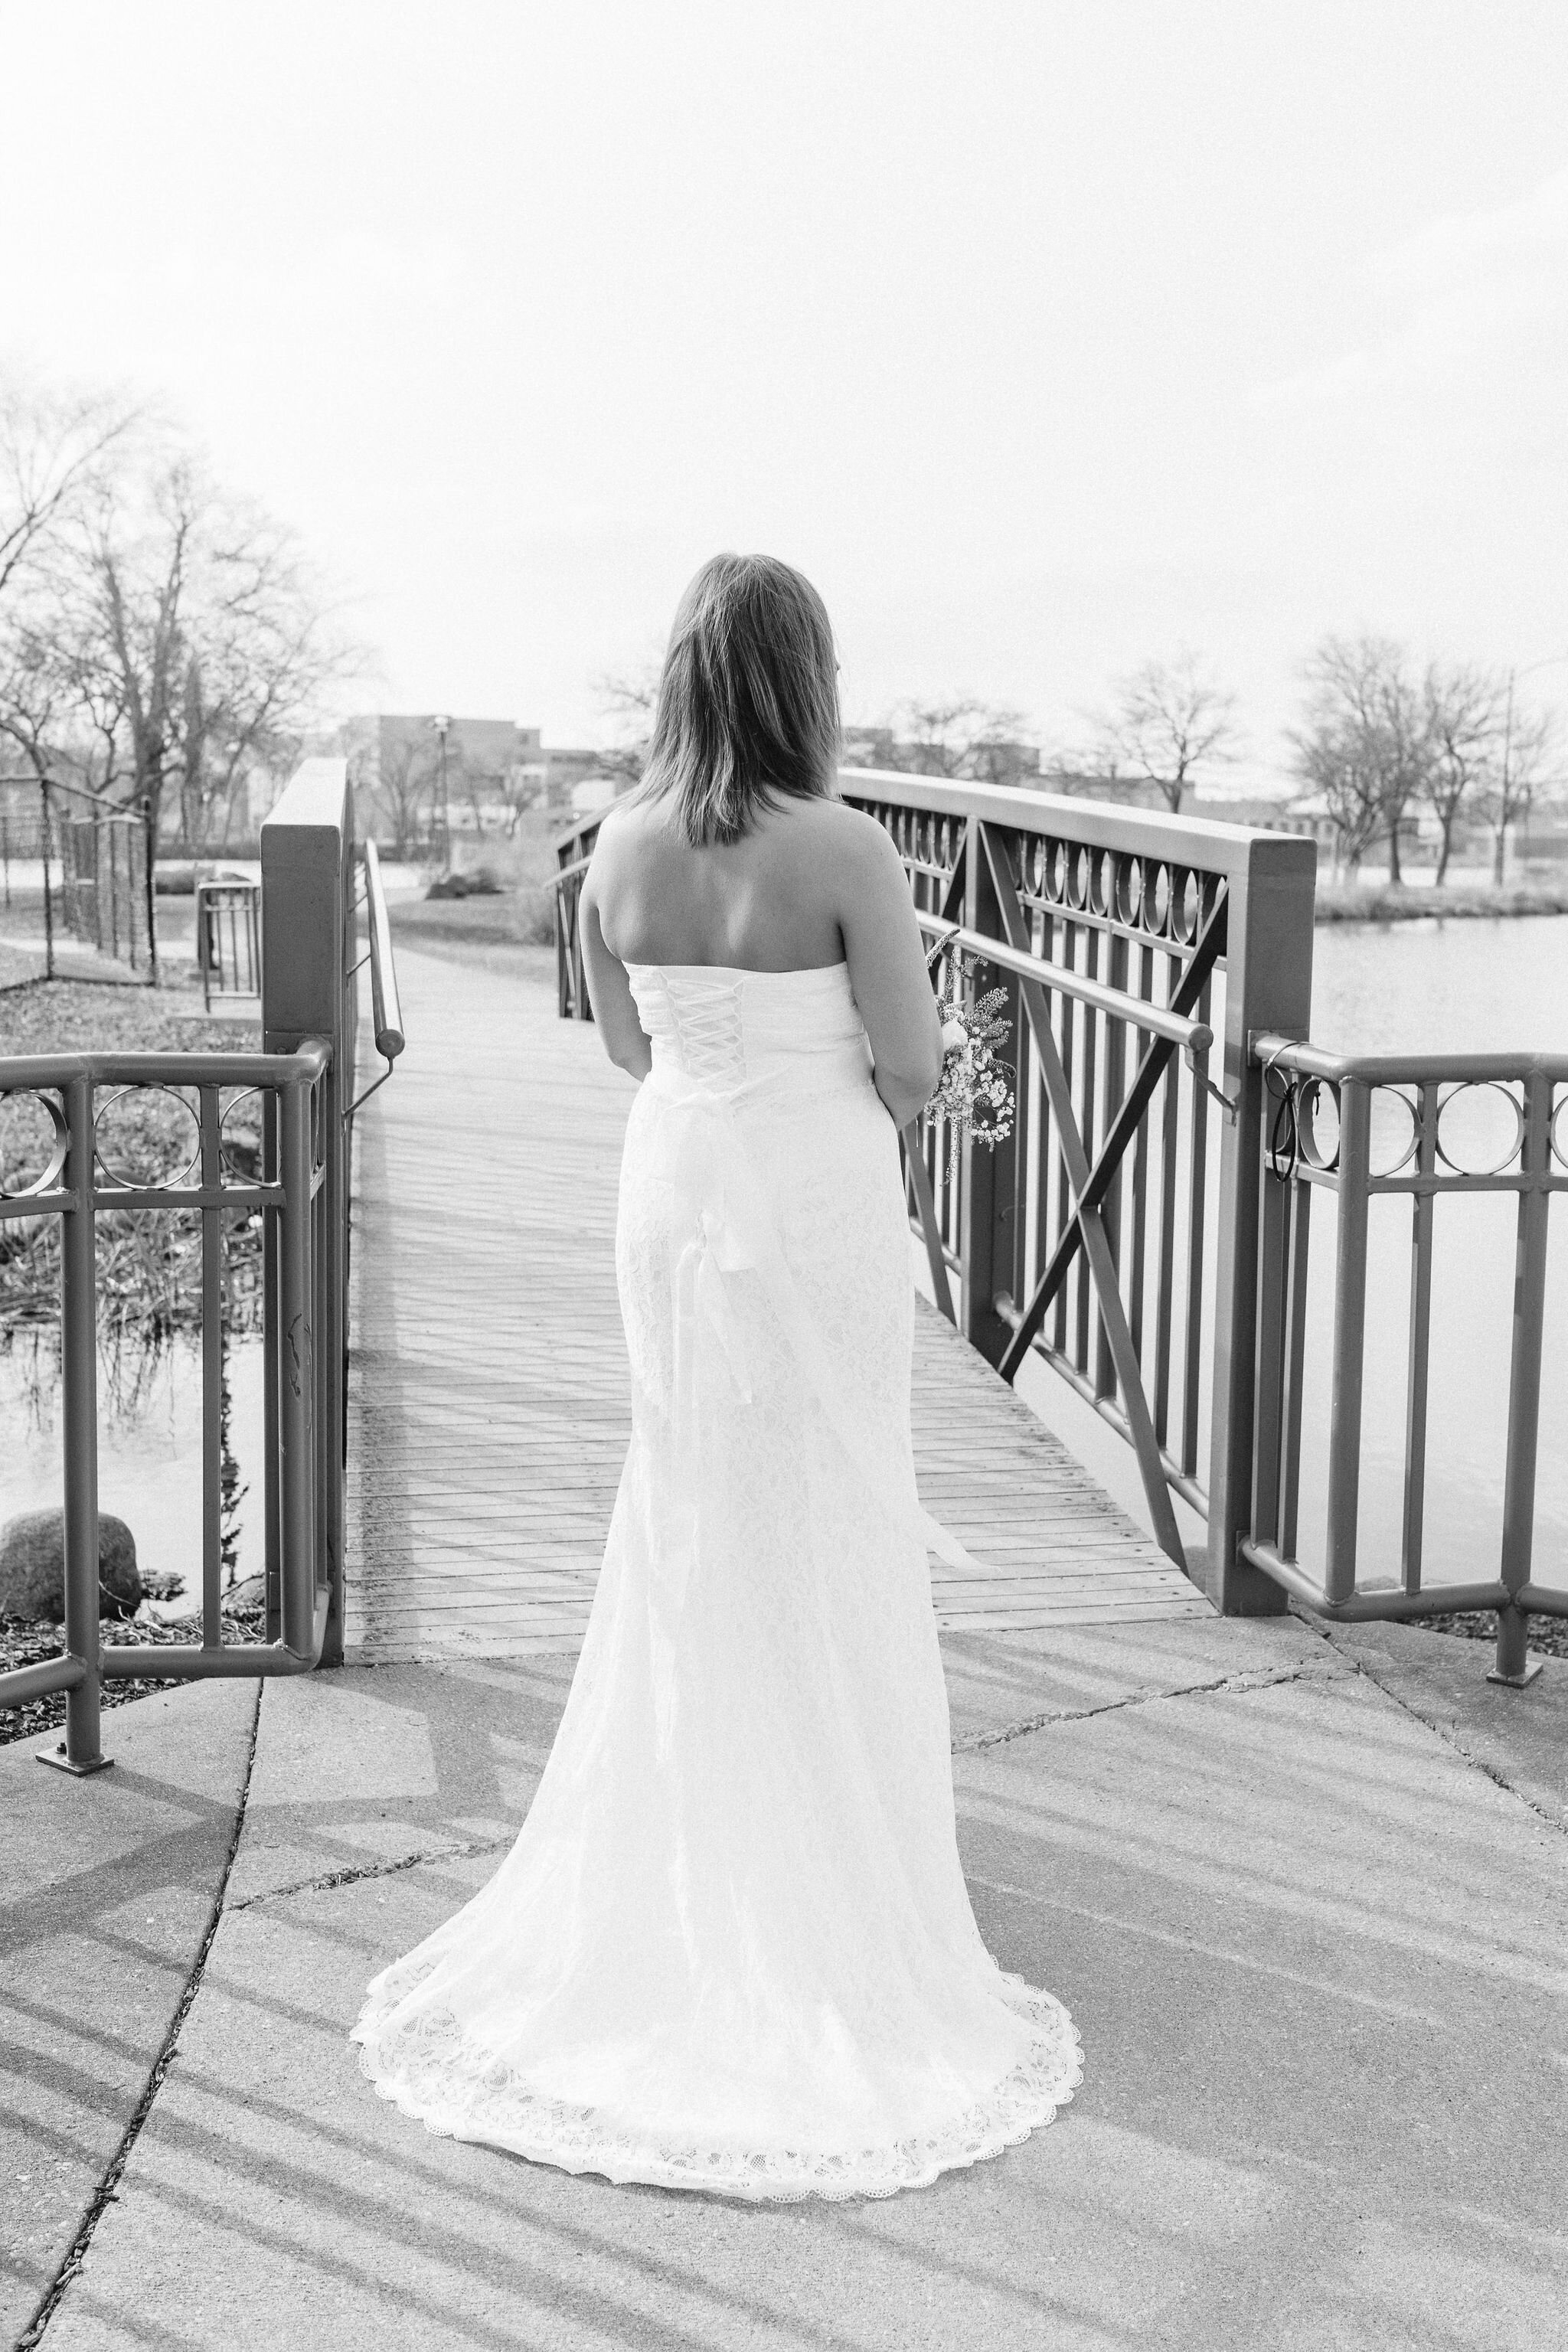 Back view of bride